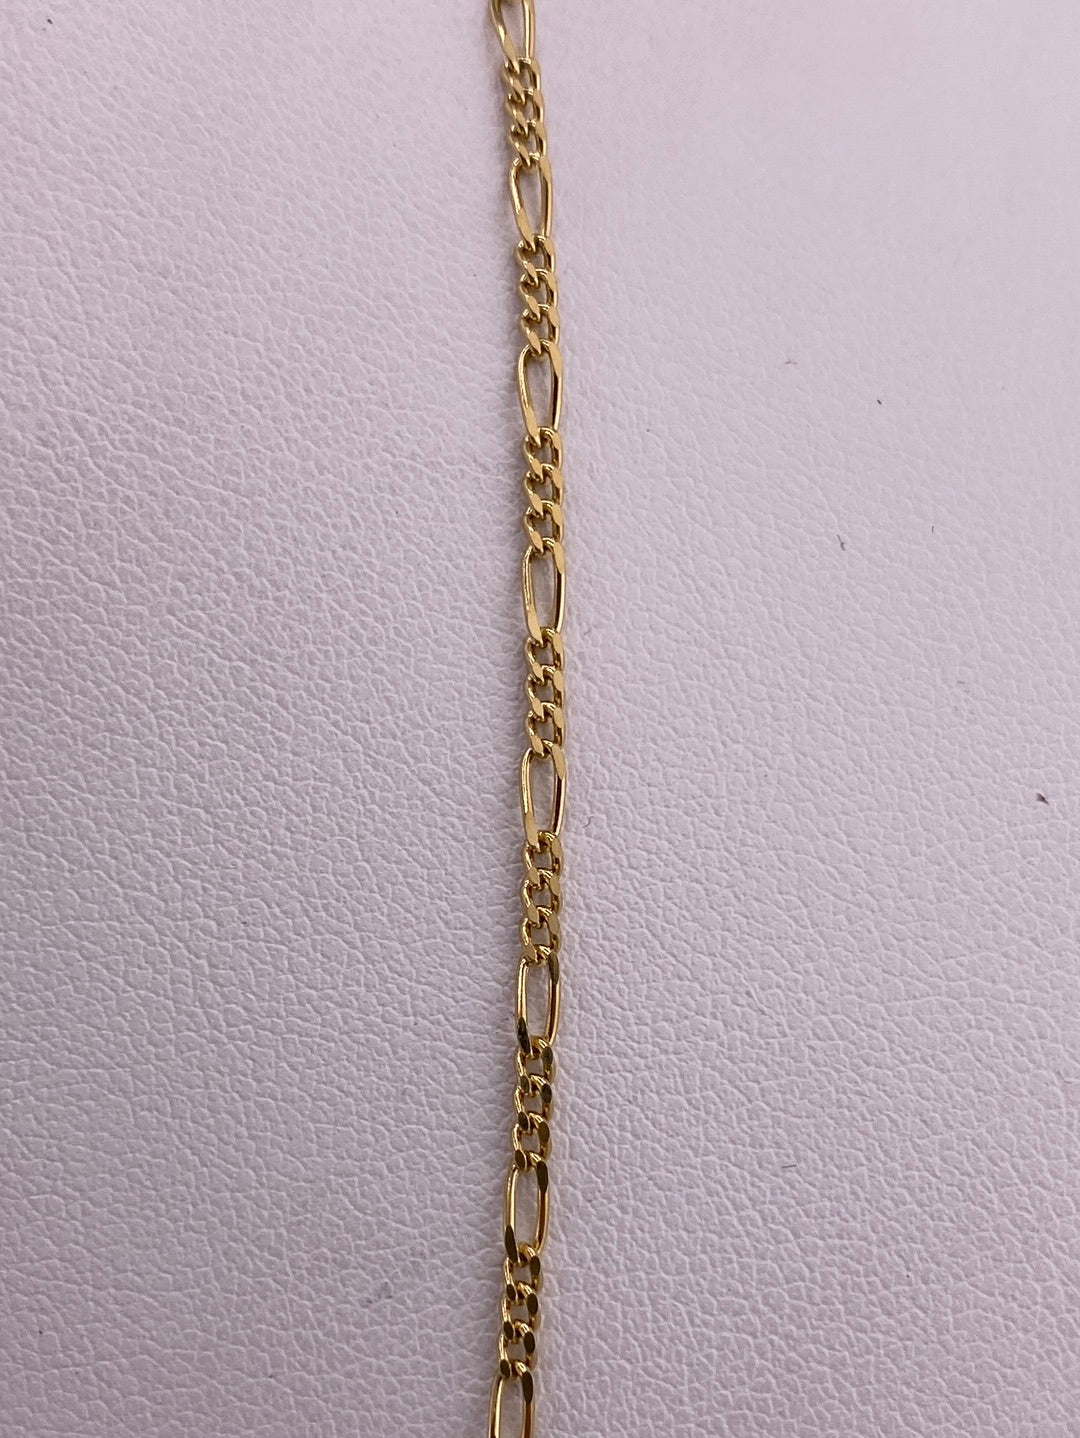 S.S. 14k Gold Plated Figaro Chains